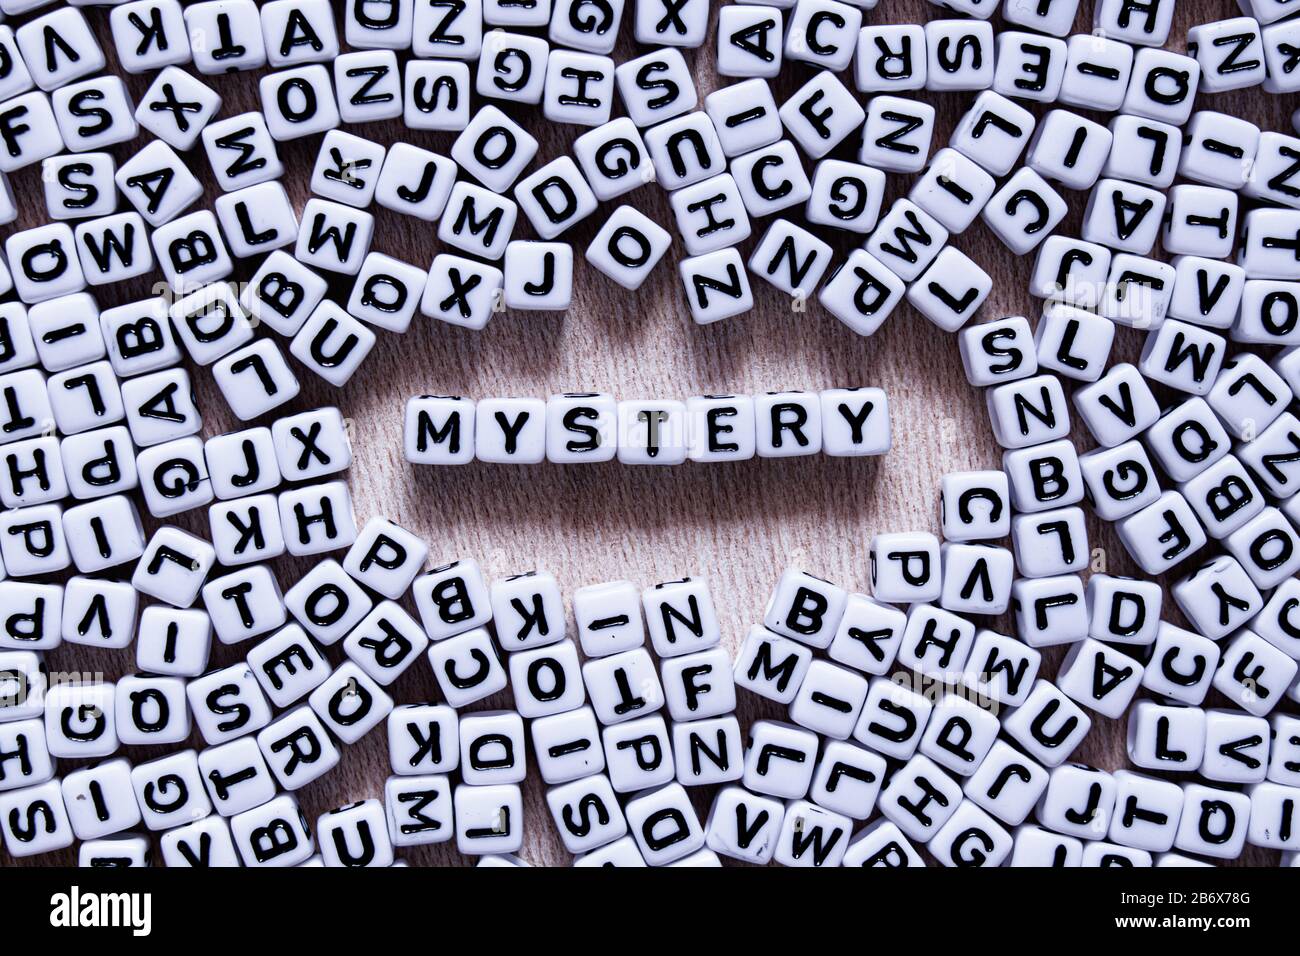 Word Mystery written in English with square and black letters mixed up with all the alphabet letters on a wooden board close-up. The other lette Stock Photo - Alamy